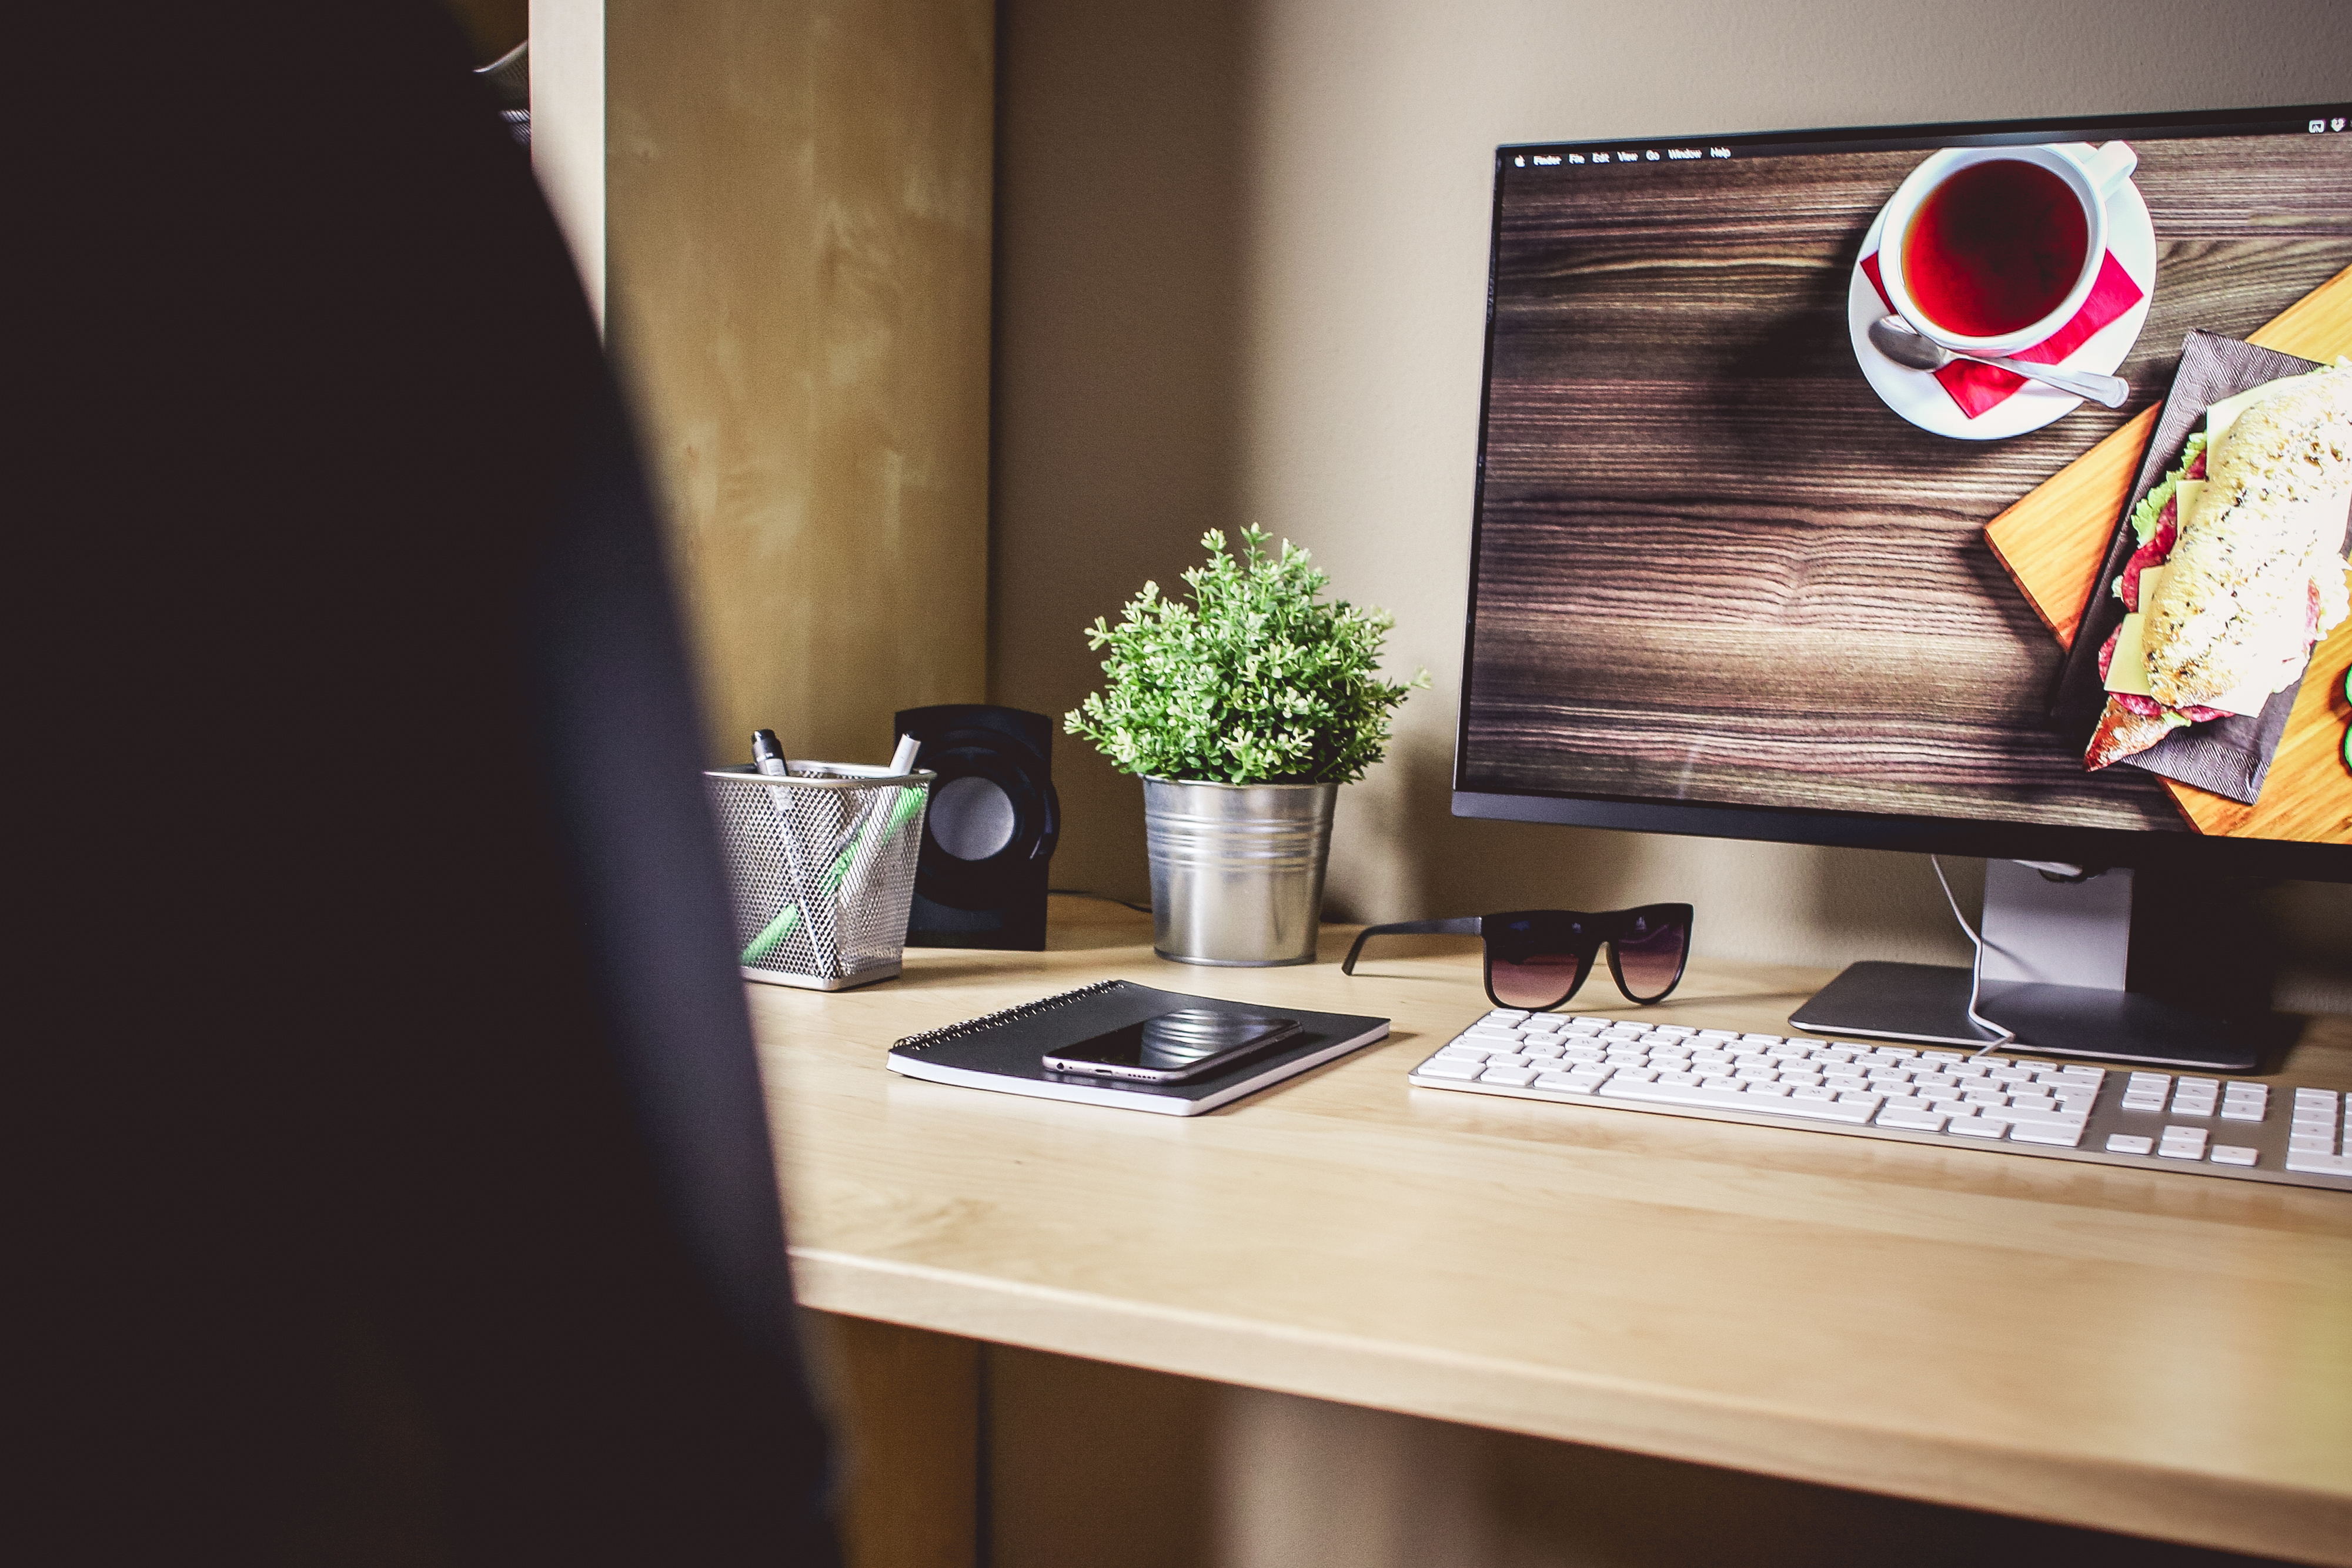 Download Designer Home Office FREE Stock Photo